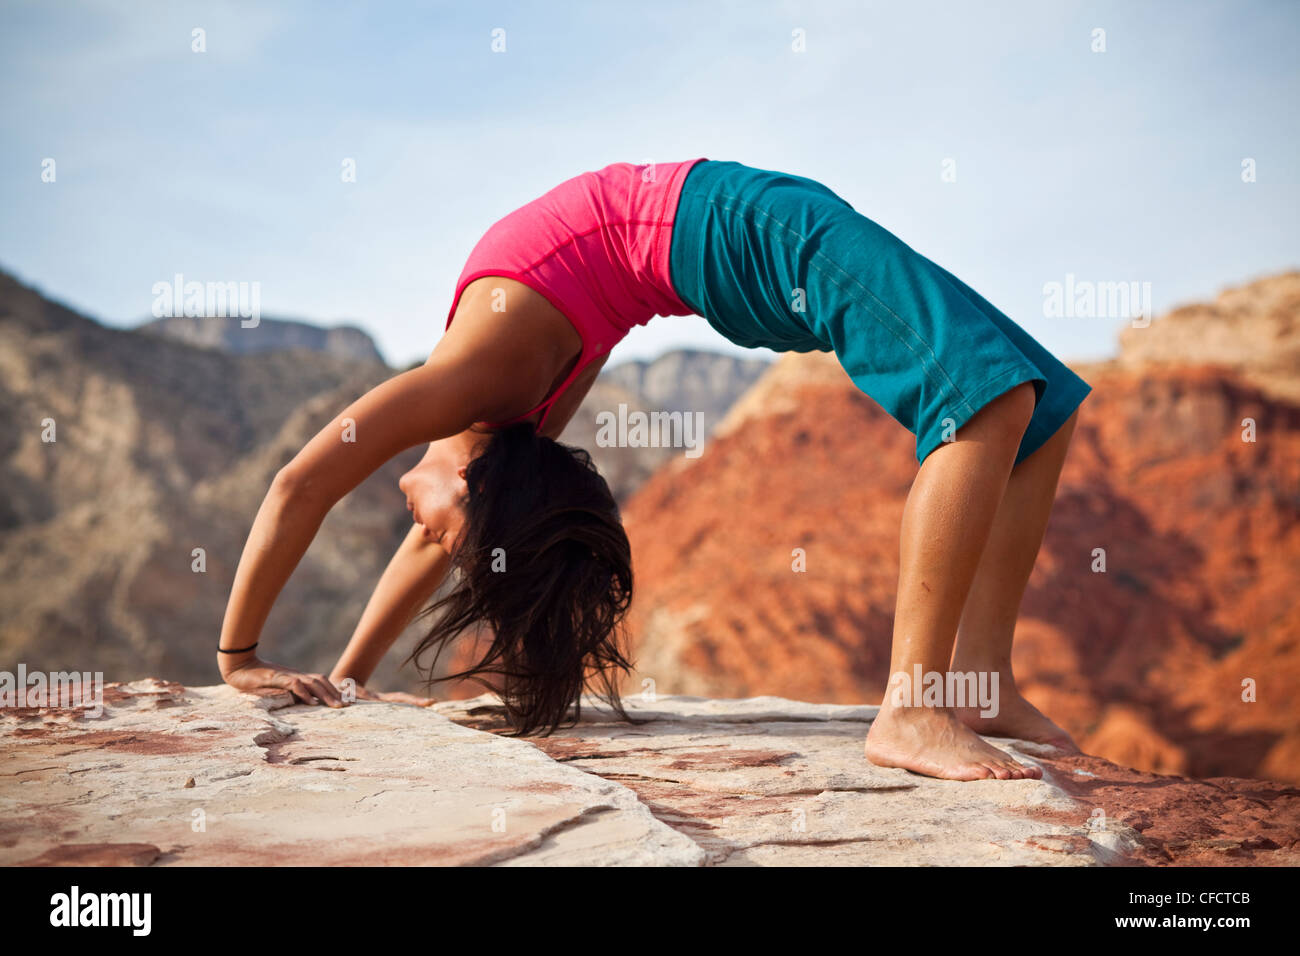 A fit young asian woman practicing yoga while on a rock climbing trip, Red Rocks, Las Vegas, Nevada, United States of America Stock Photo